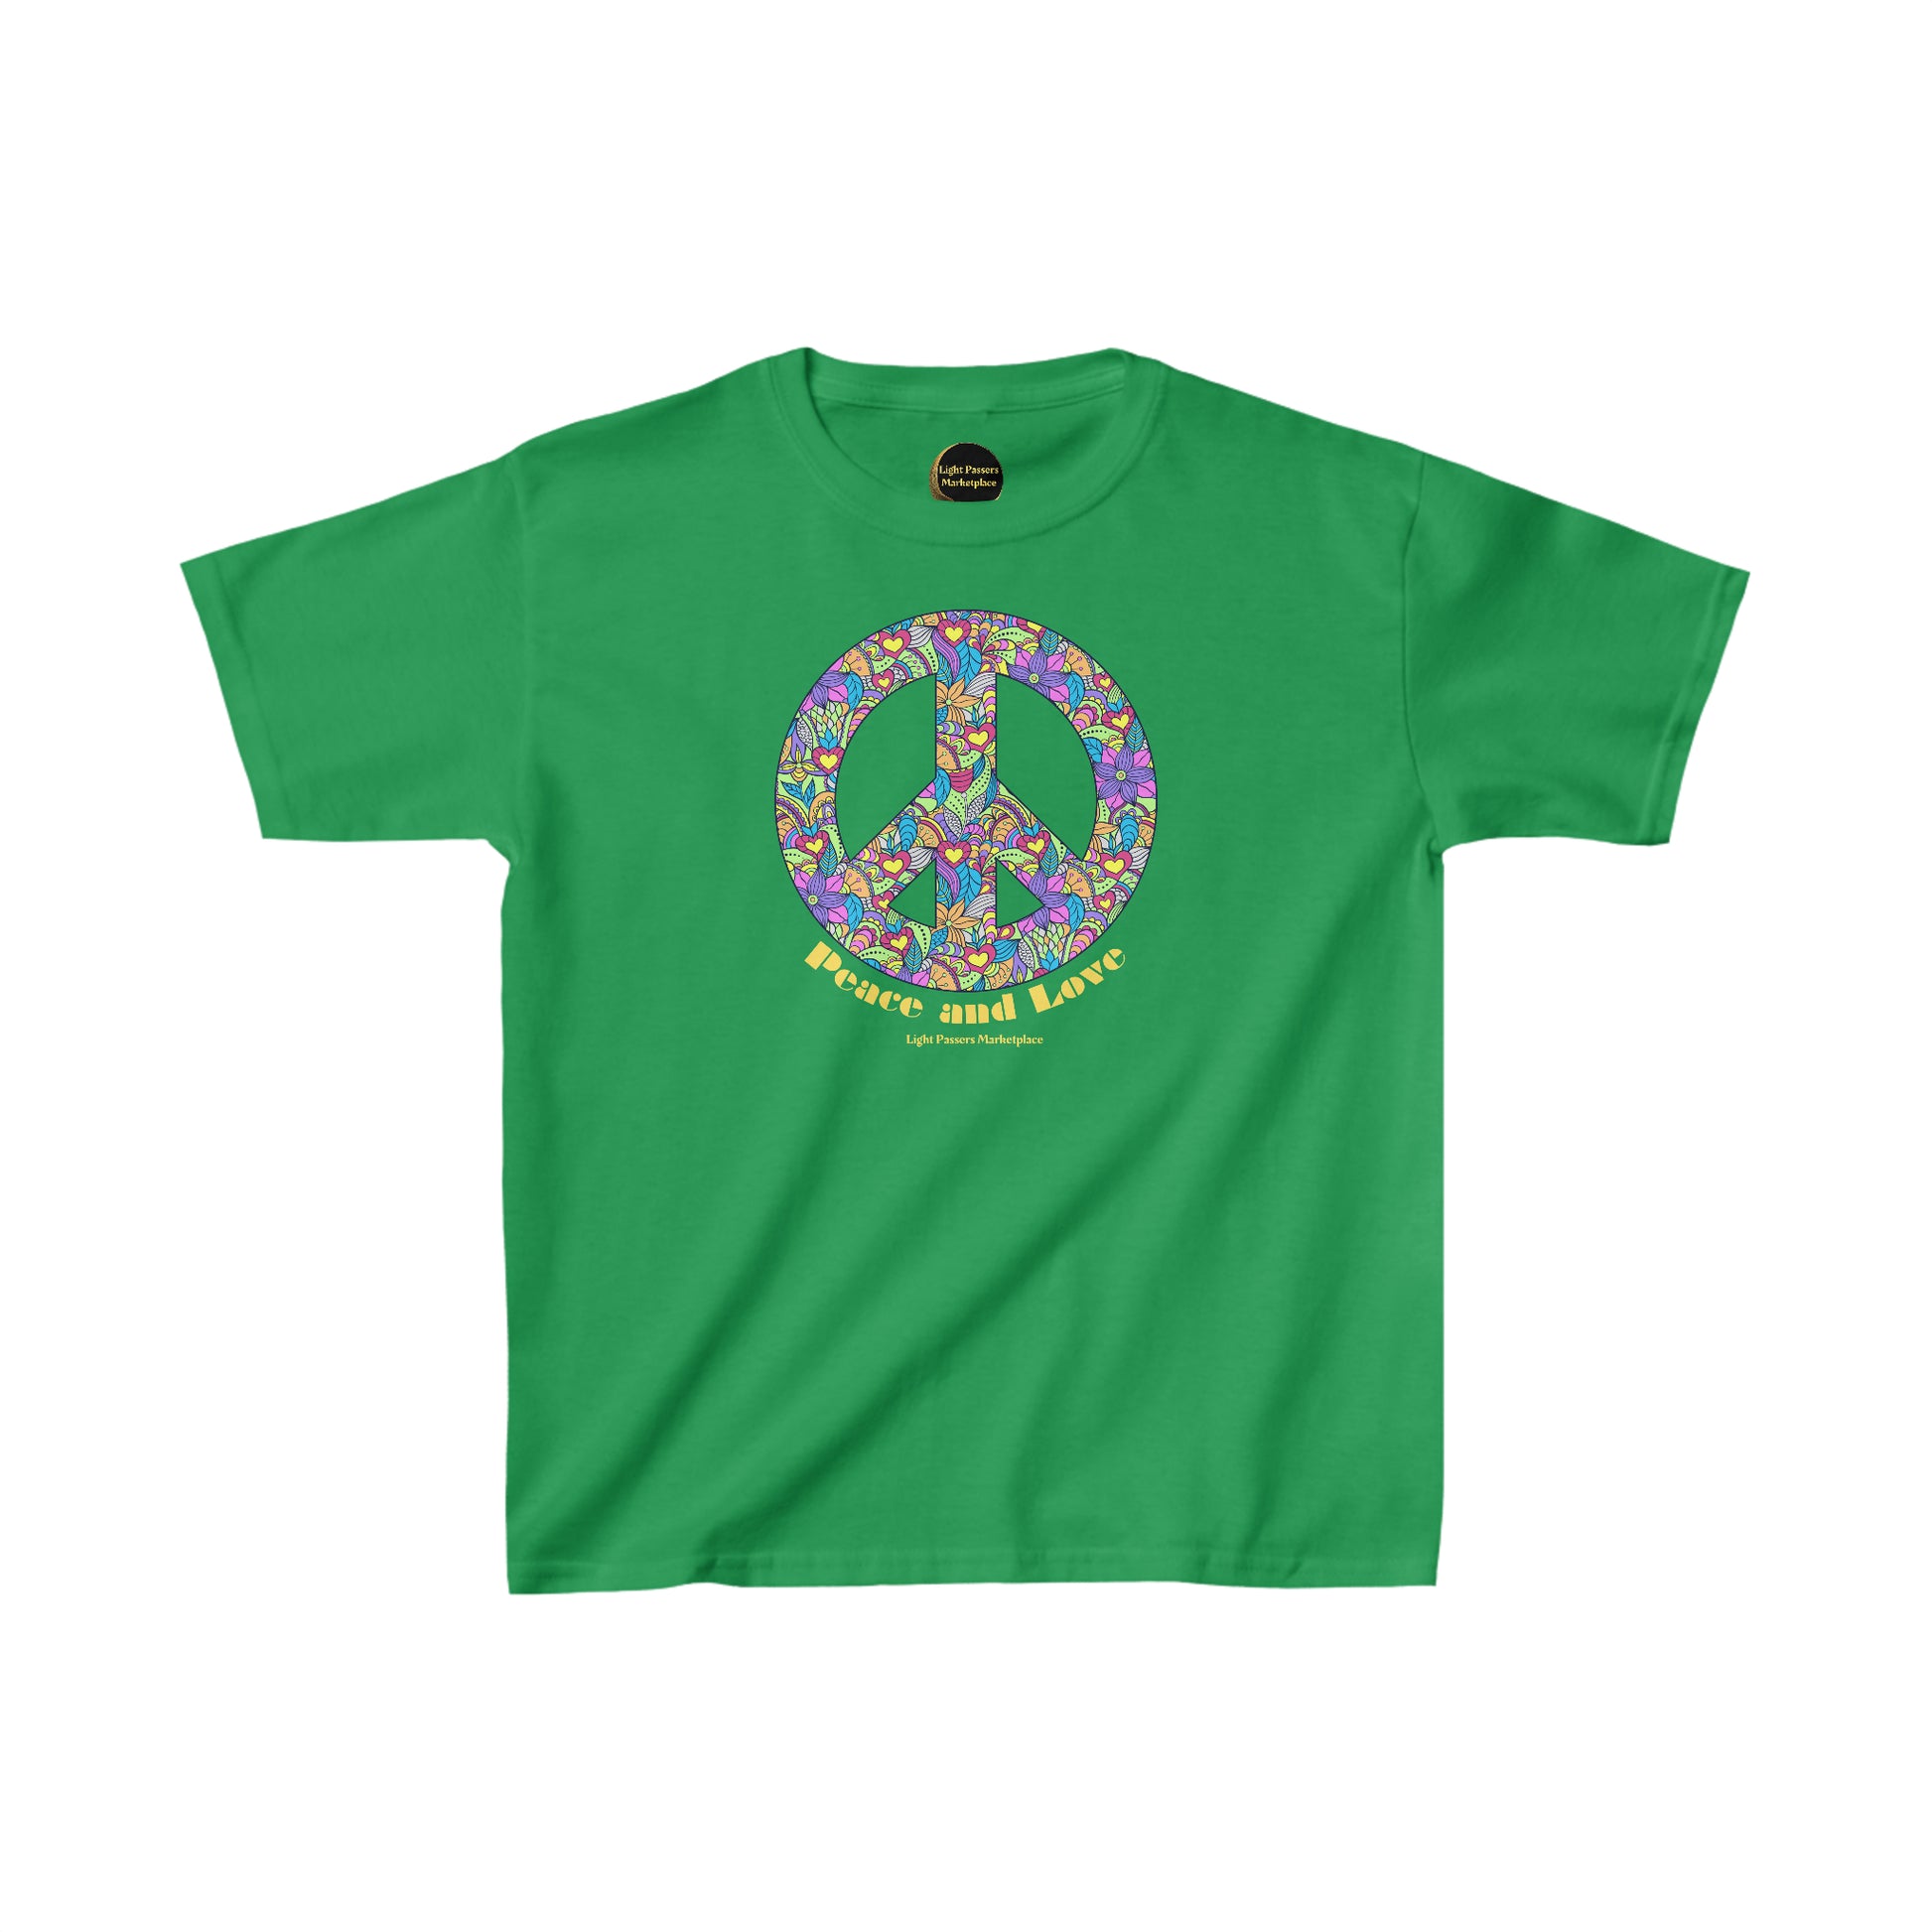 A green youth t-shirt featuring a peace sign adorned with colorful flowers and hearts. Made of 100% cotton with twill tape shoulders for durability and a curl-resistant collar. Ethically sourced and Oeko-Tex certified.